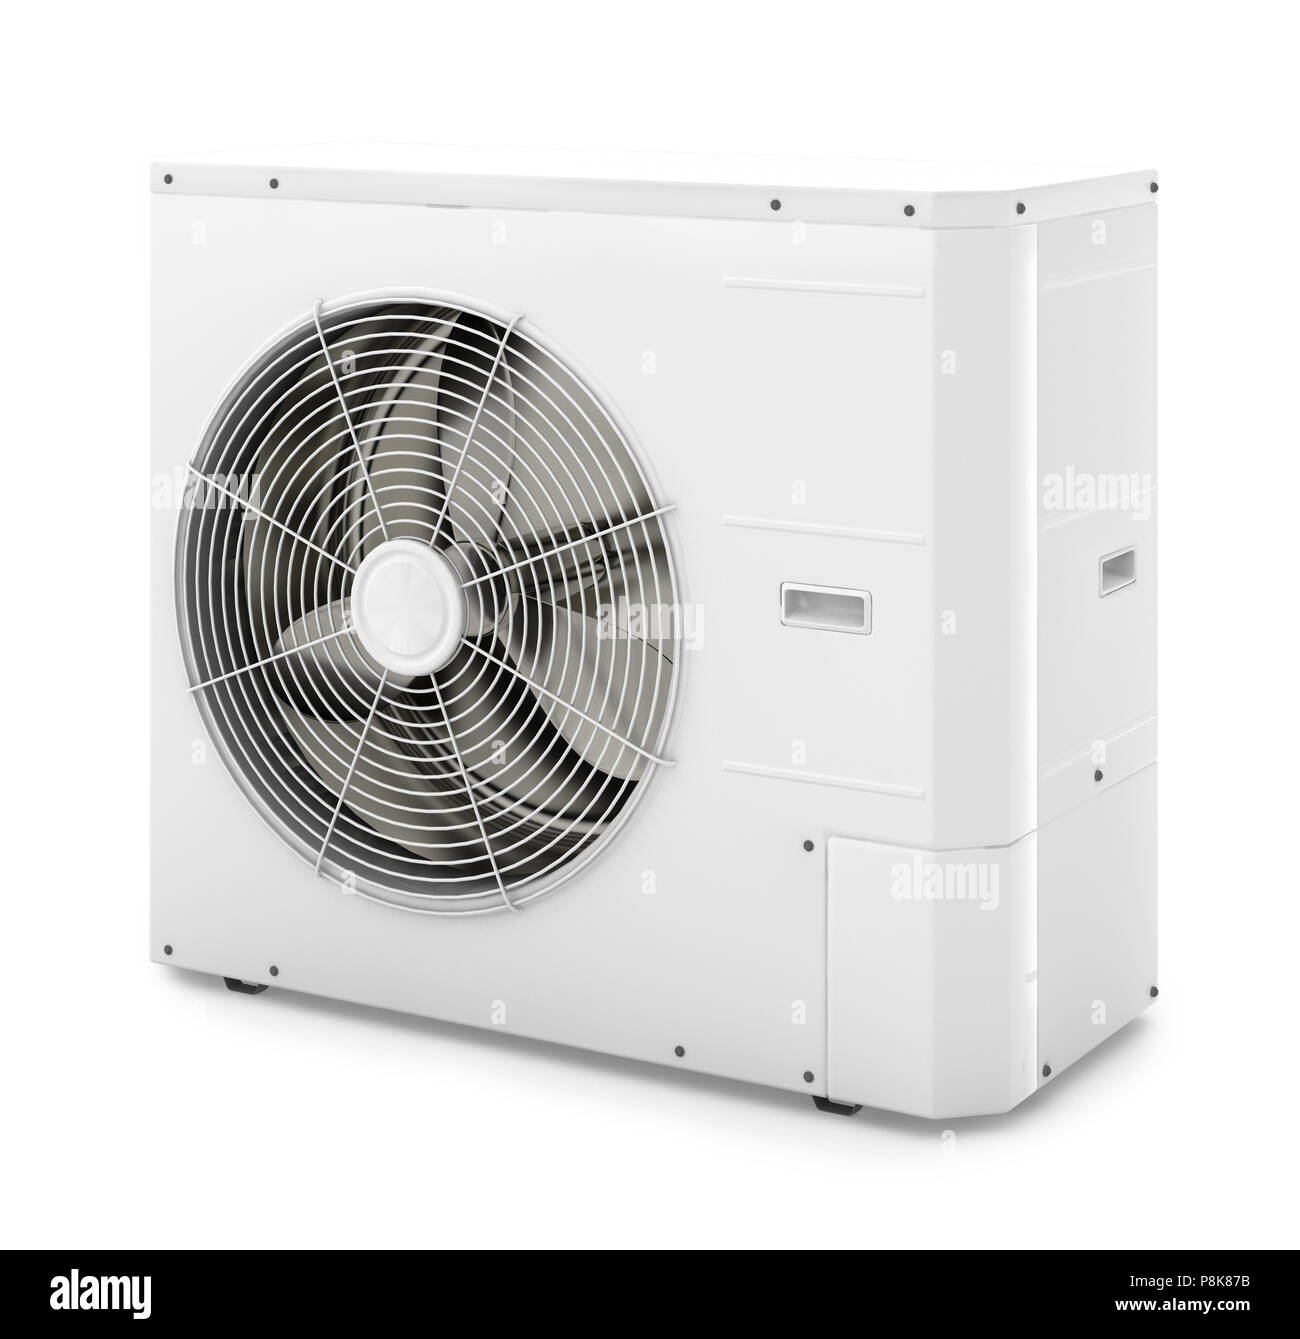 Page 3 Outdoor Unit Air Conditioner High Resolution Stock Photography And Images Alamy